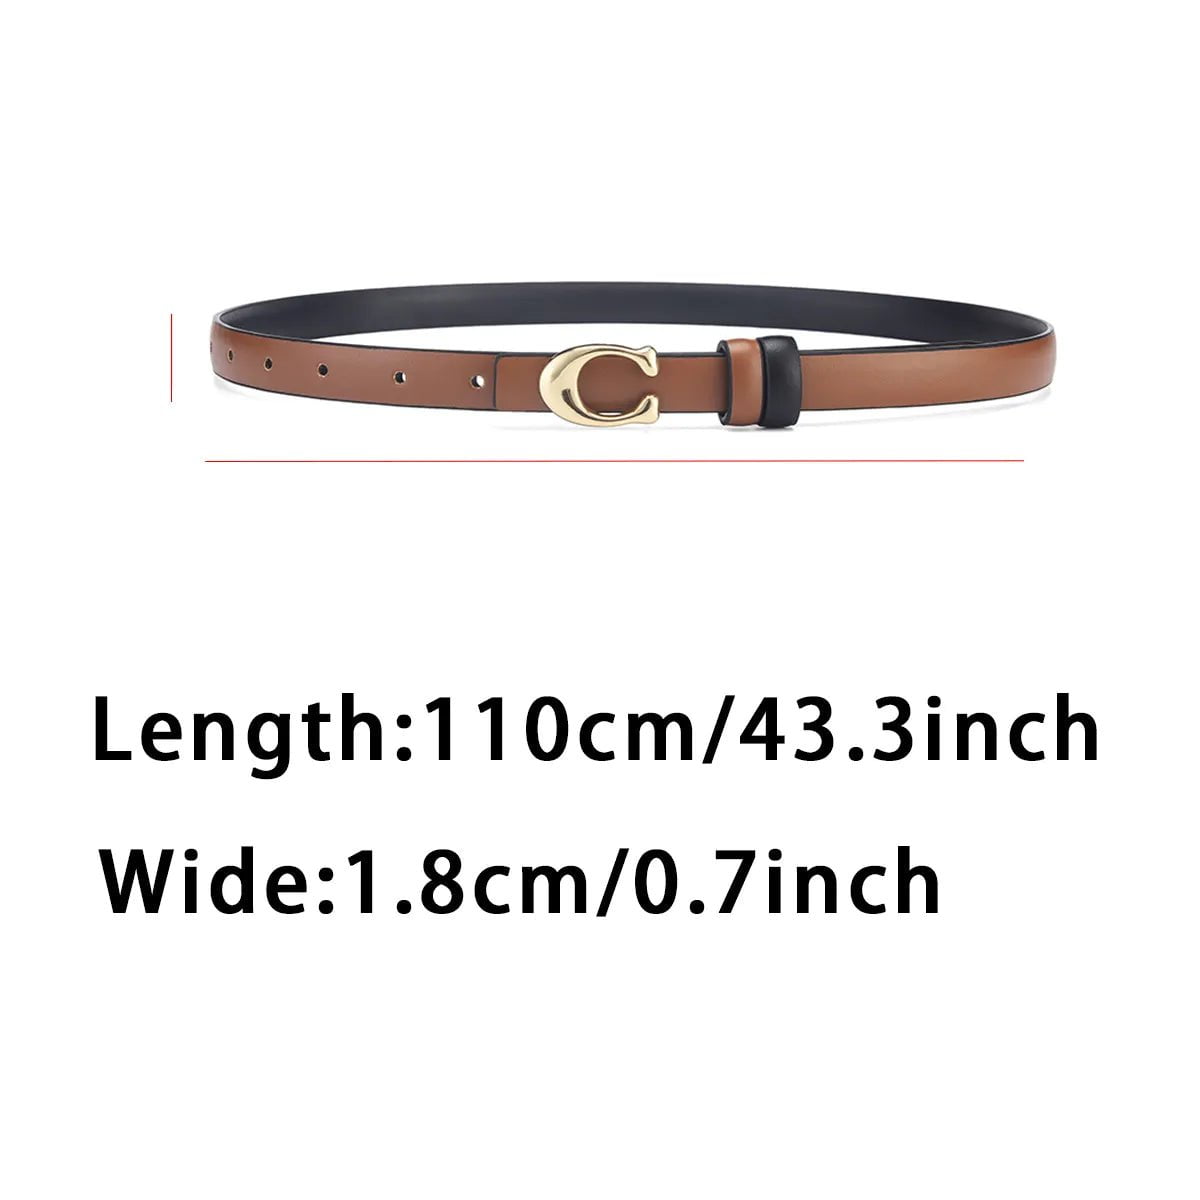 New Women's Fashion C-shaped Buckle Thin Belt - Detachable Double-Sided Denim, Ideal Gift for Mothers and Girlfriends